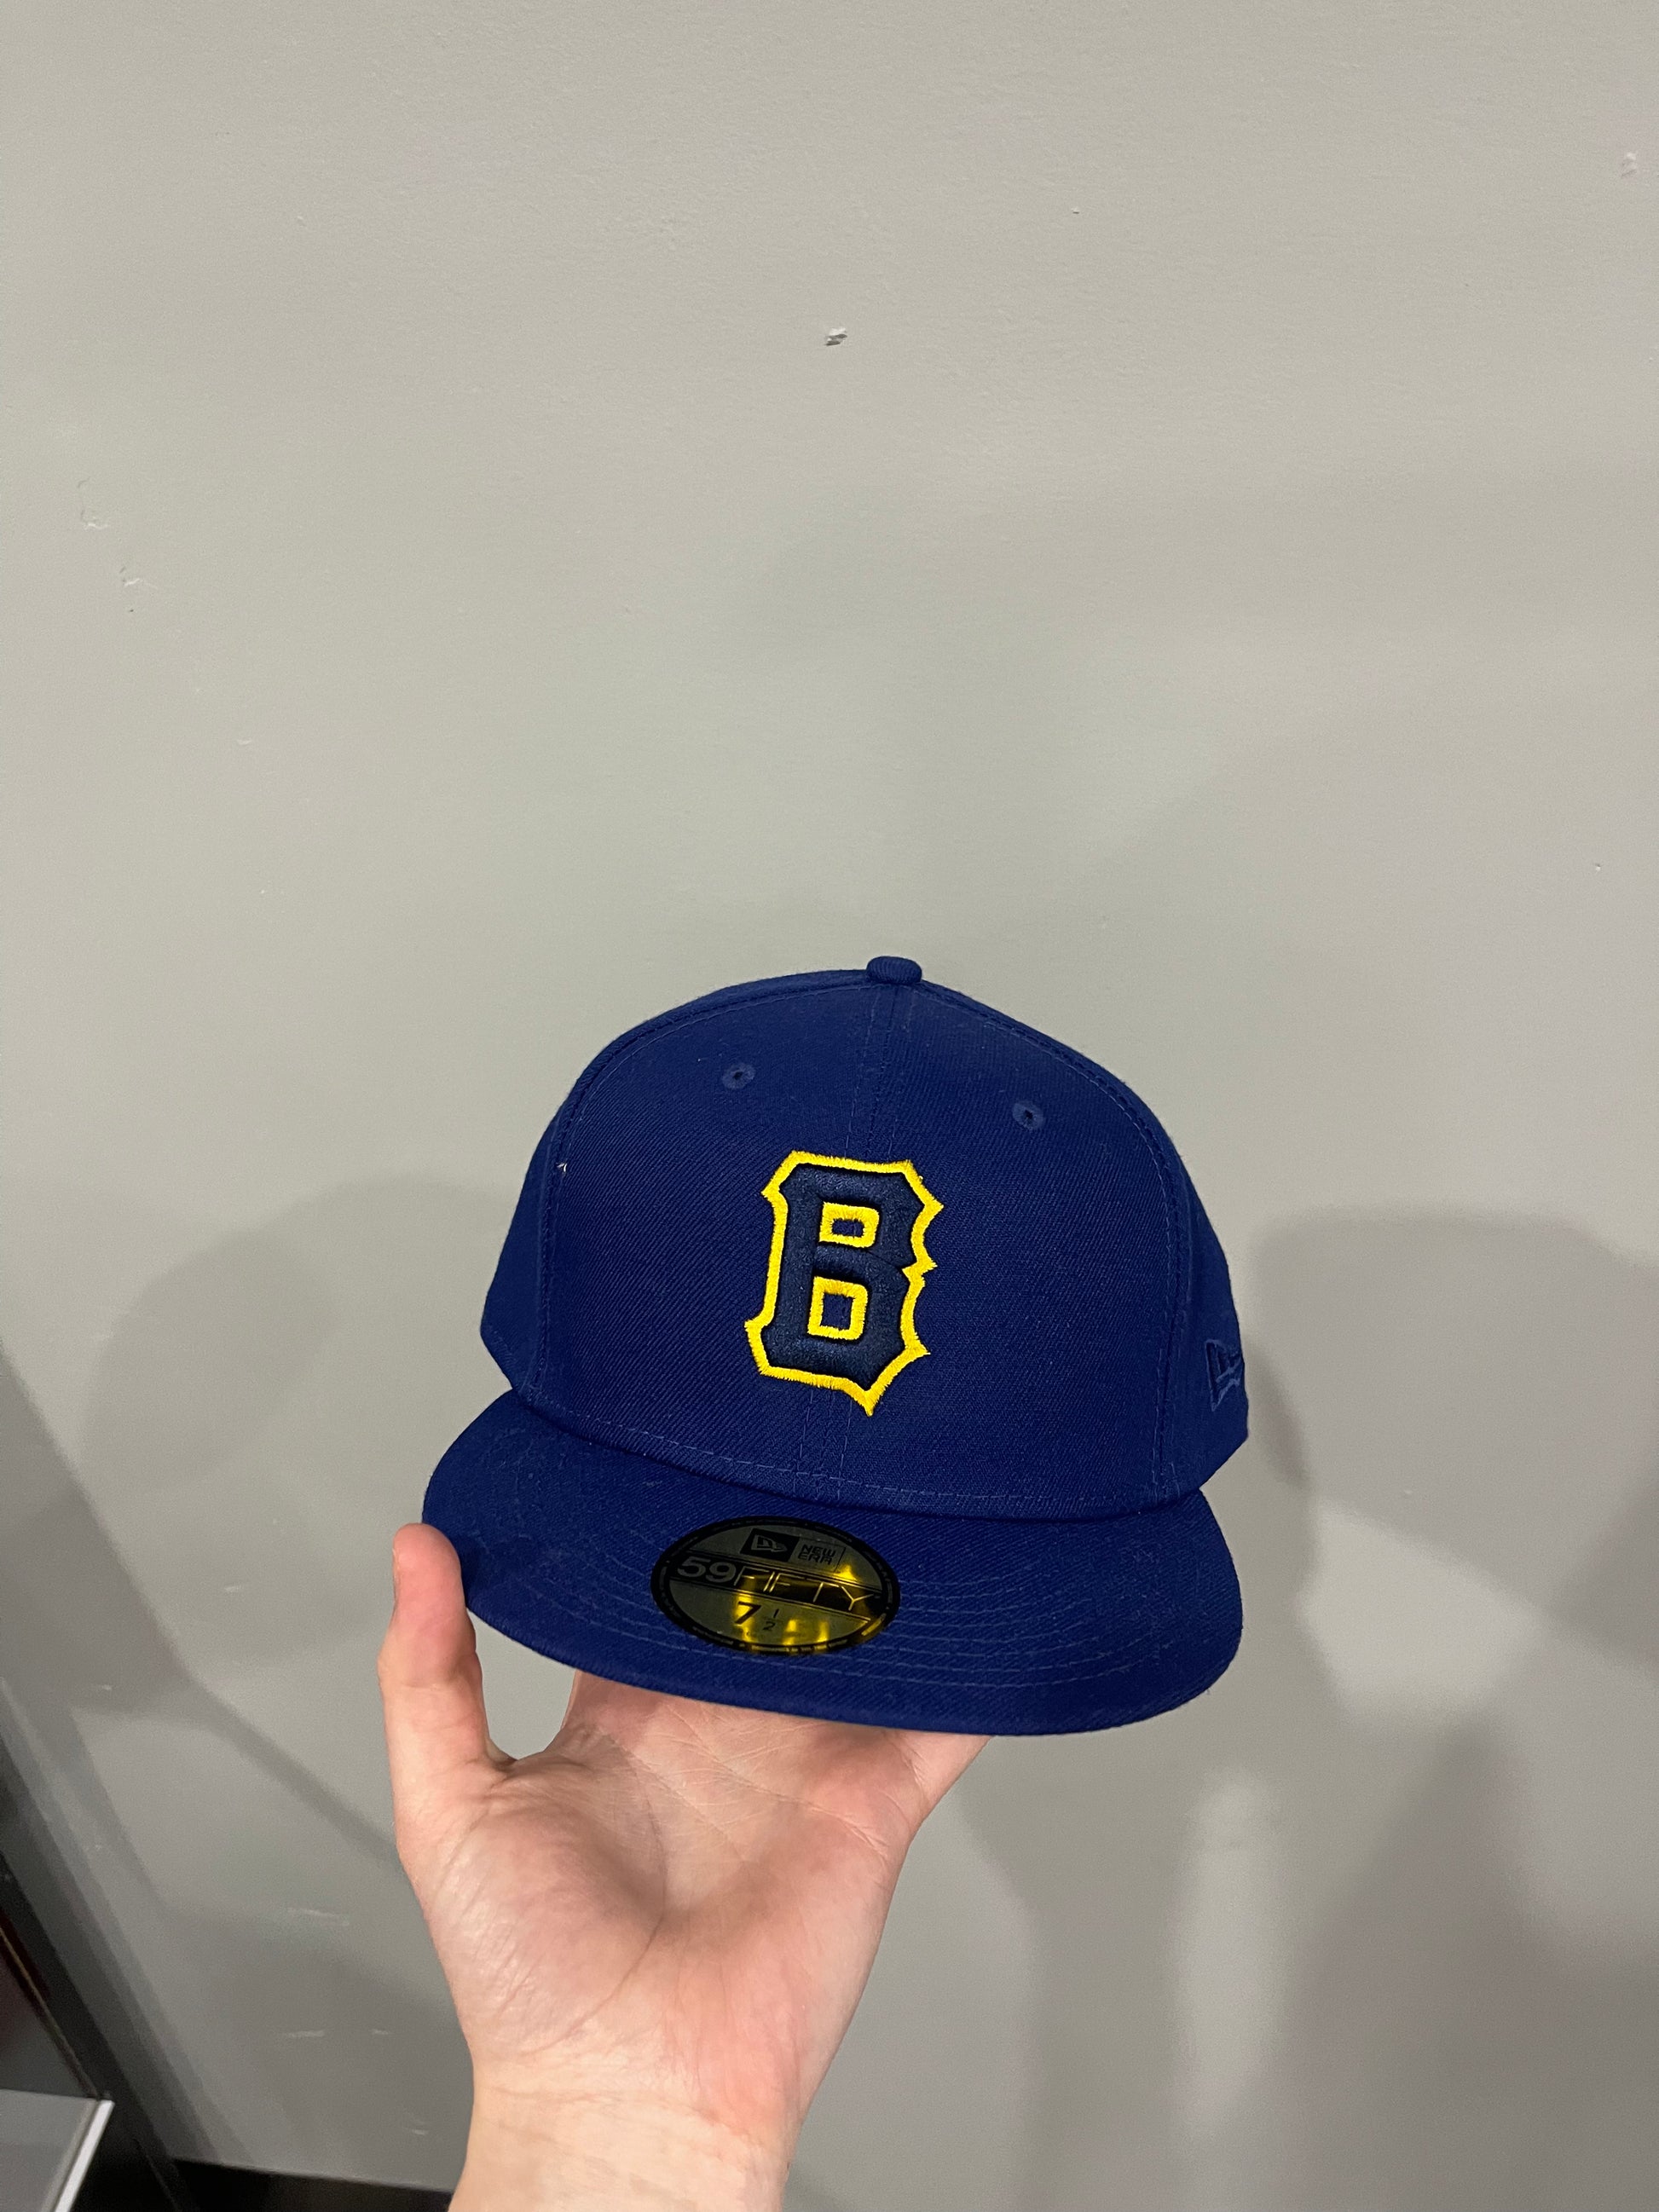 New Era 59Fifty Boston Bees "Brewers" Fitted Hat, Hat - Sneakersbe Sneakers Sale Online